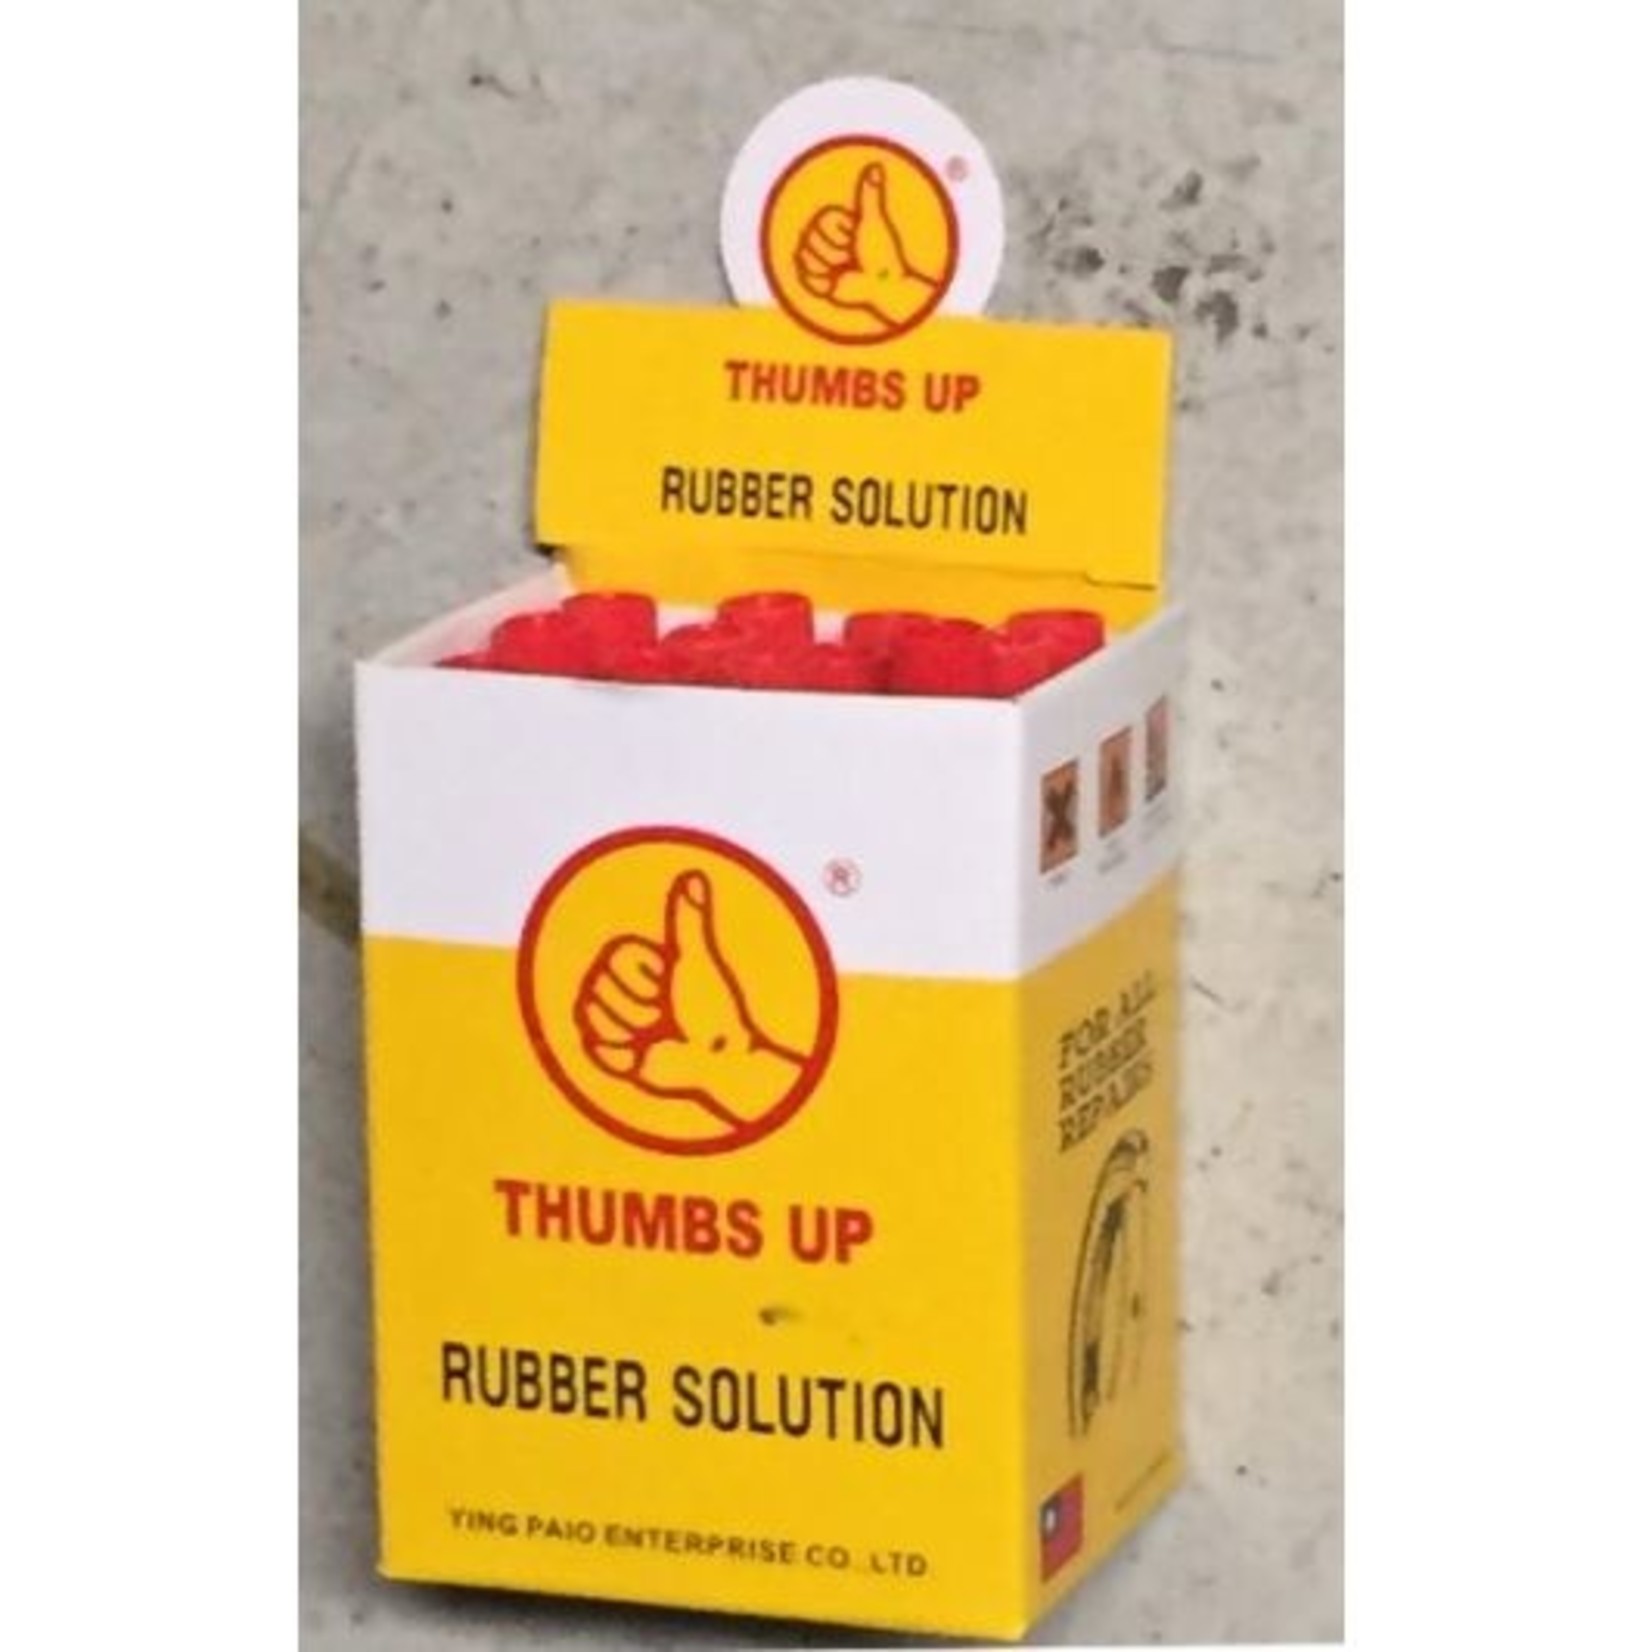 Velox Velox Adhesion Pacthes Ying Paio Rubber Solution 12 Pcs Per Box